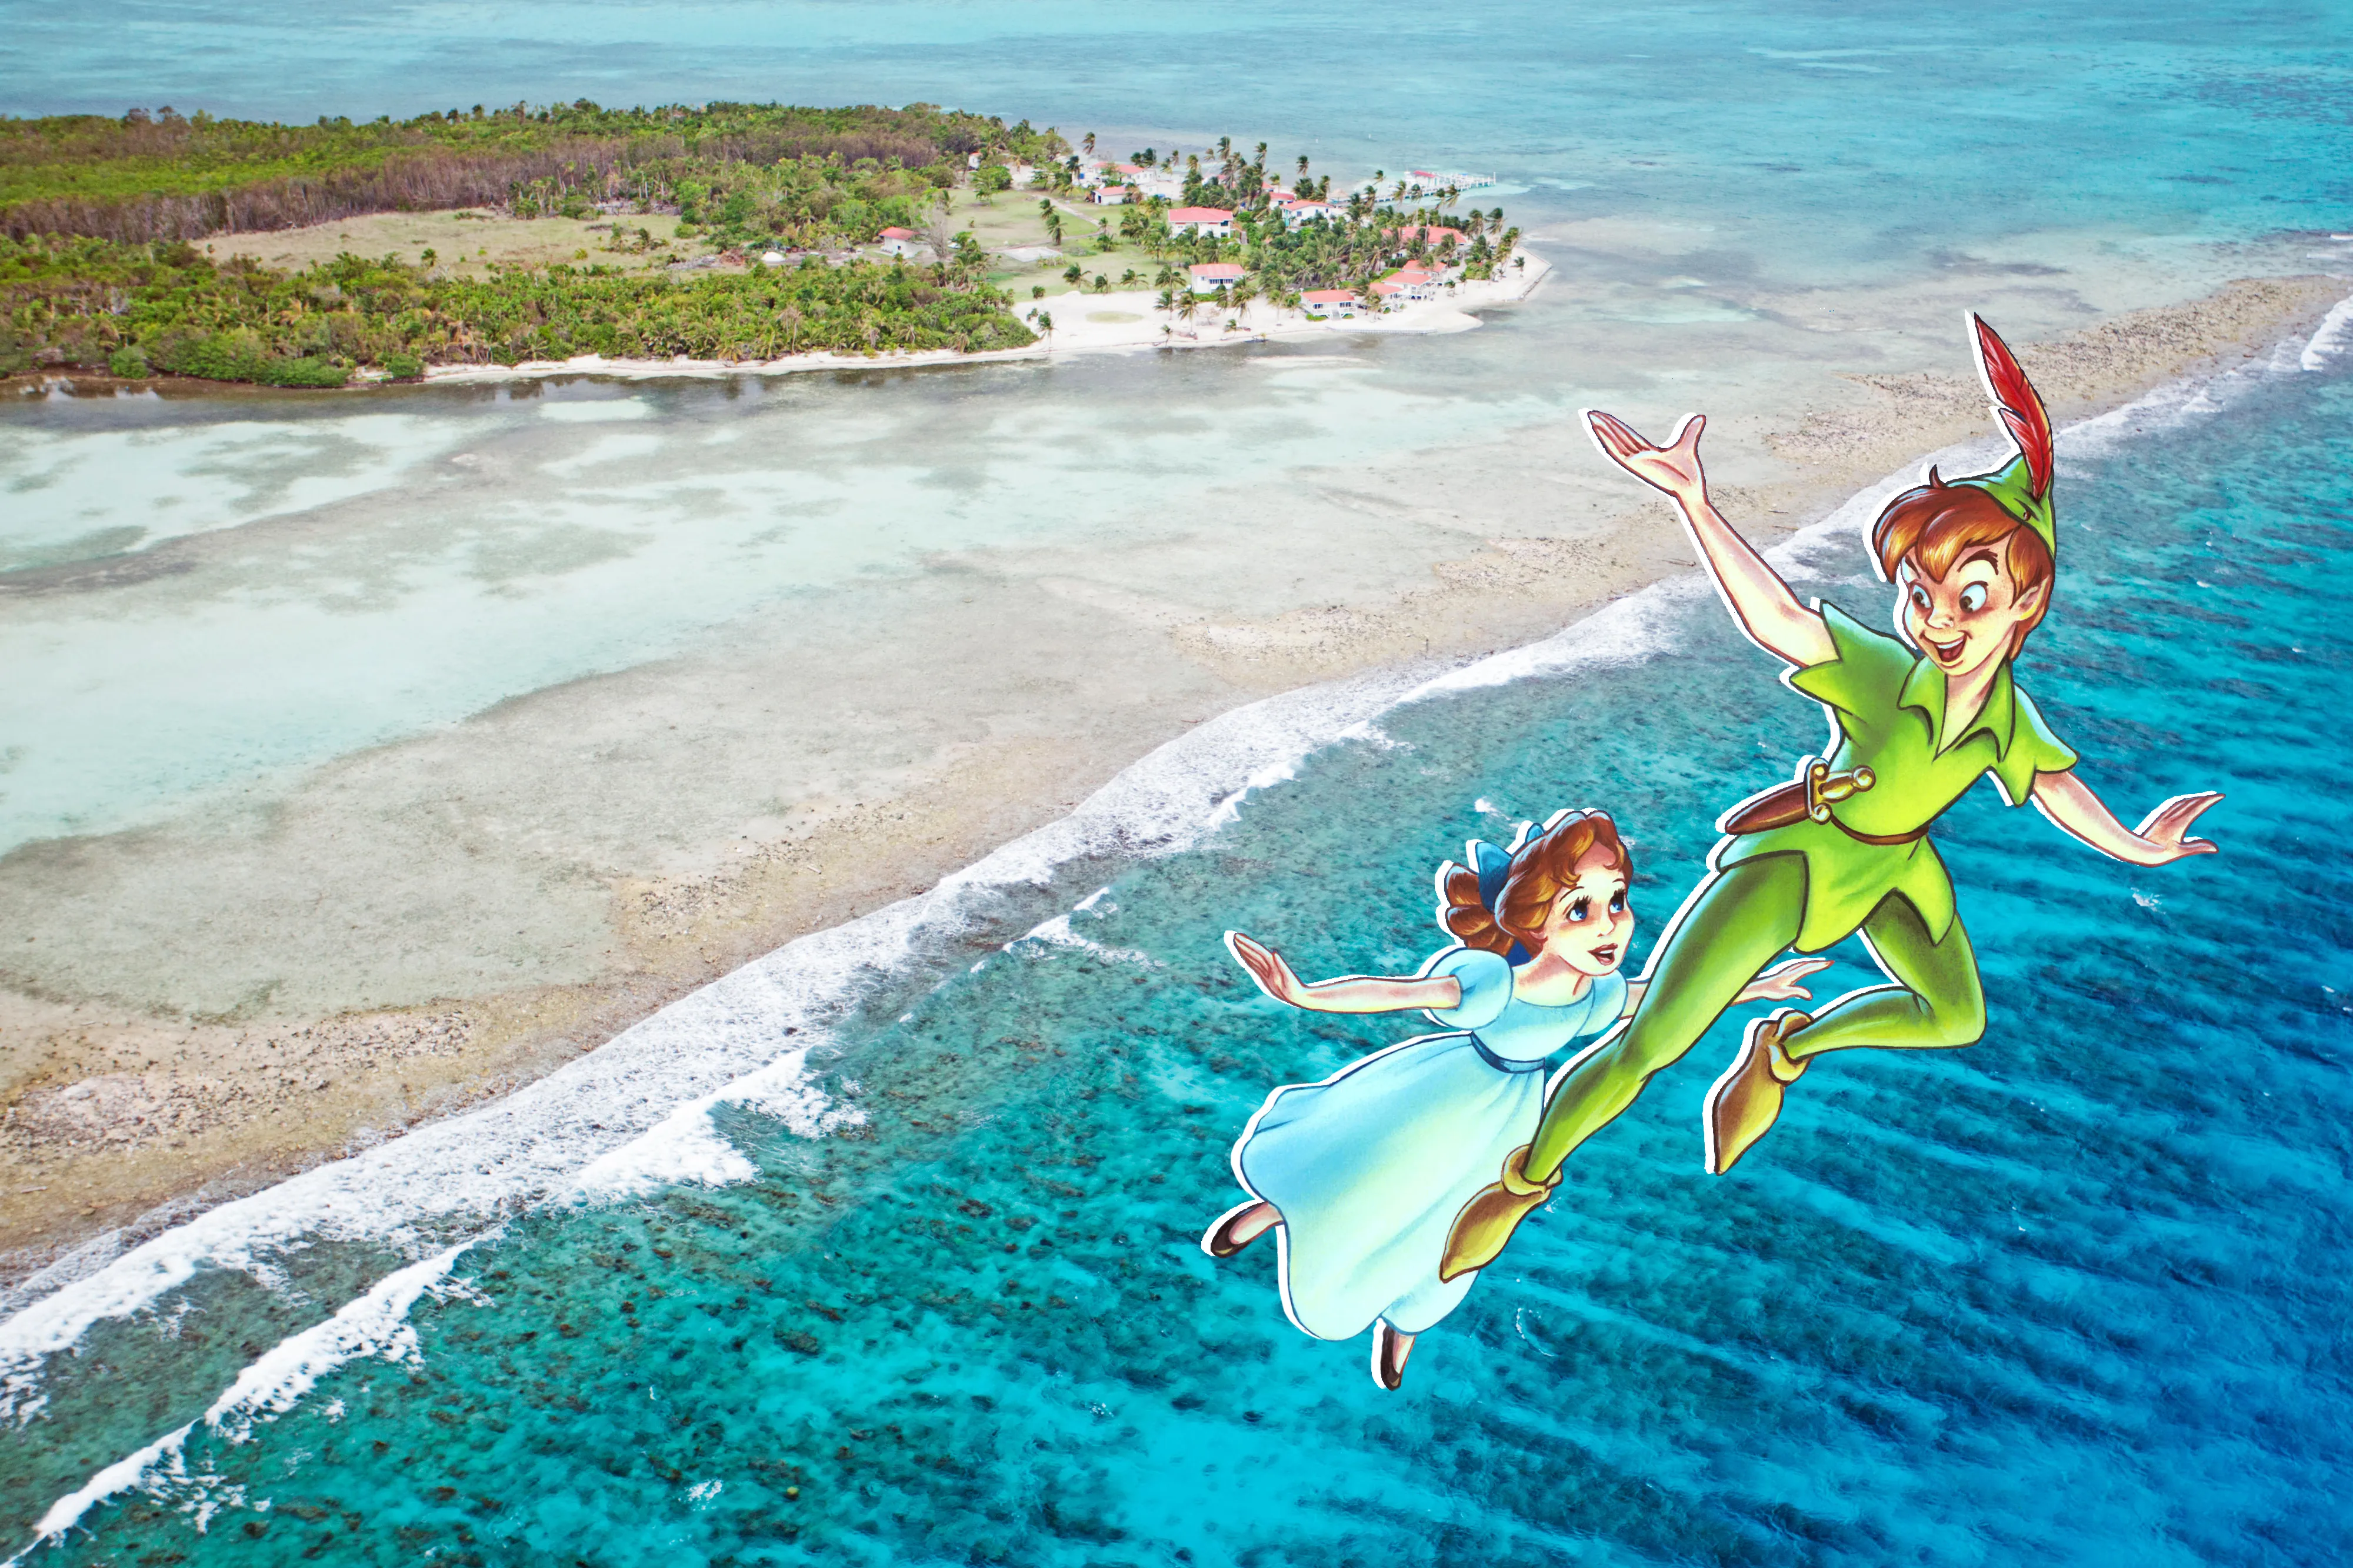 Only People Named Peter and Wendy Are Eligible to Win This Free 'Neverland' Tropical Dream Vacation. Here's How to Enter